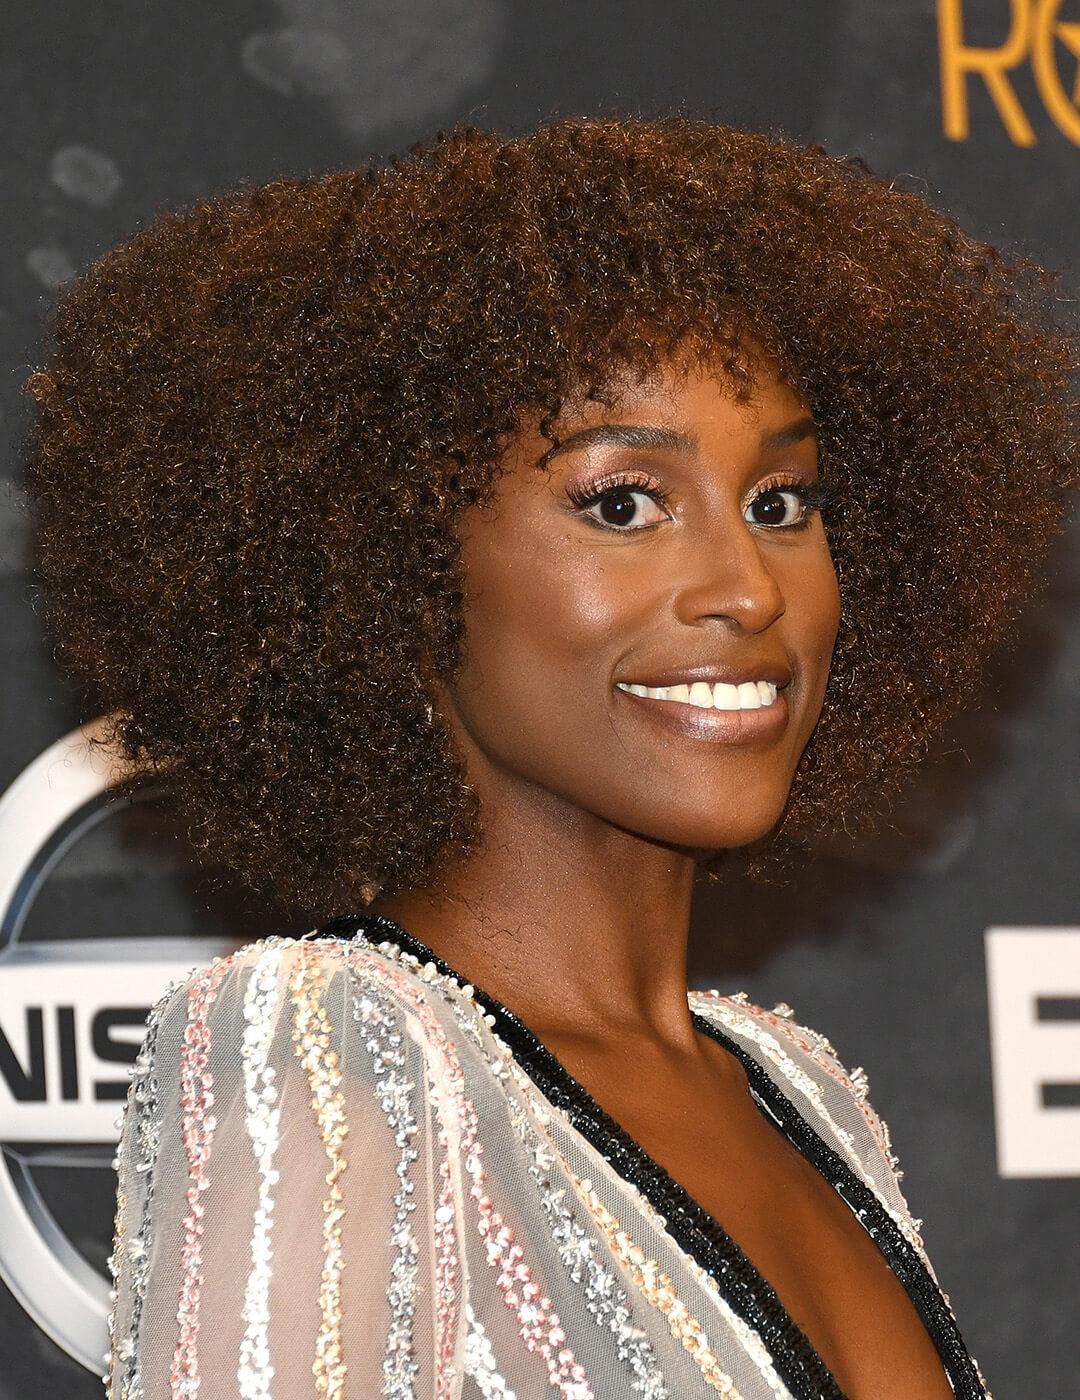 Issa Rae attends Black Girls Rock! 2017 at NJPAC on August 5, 2017 in Newark, New Jersey.